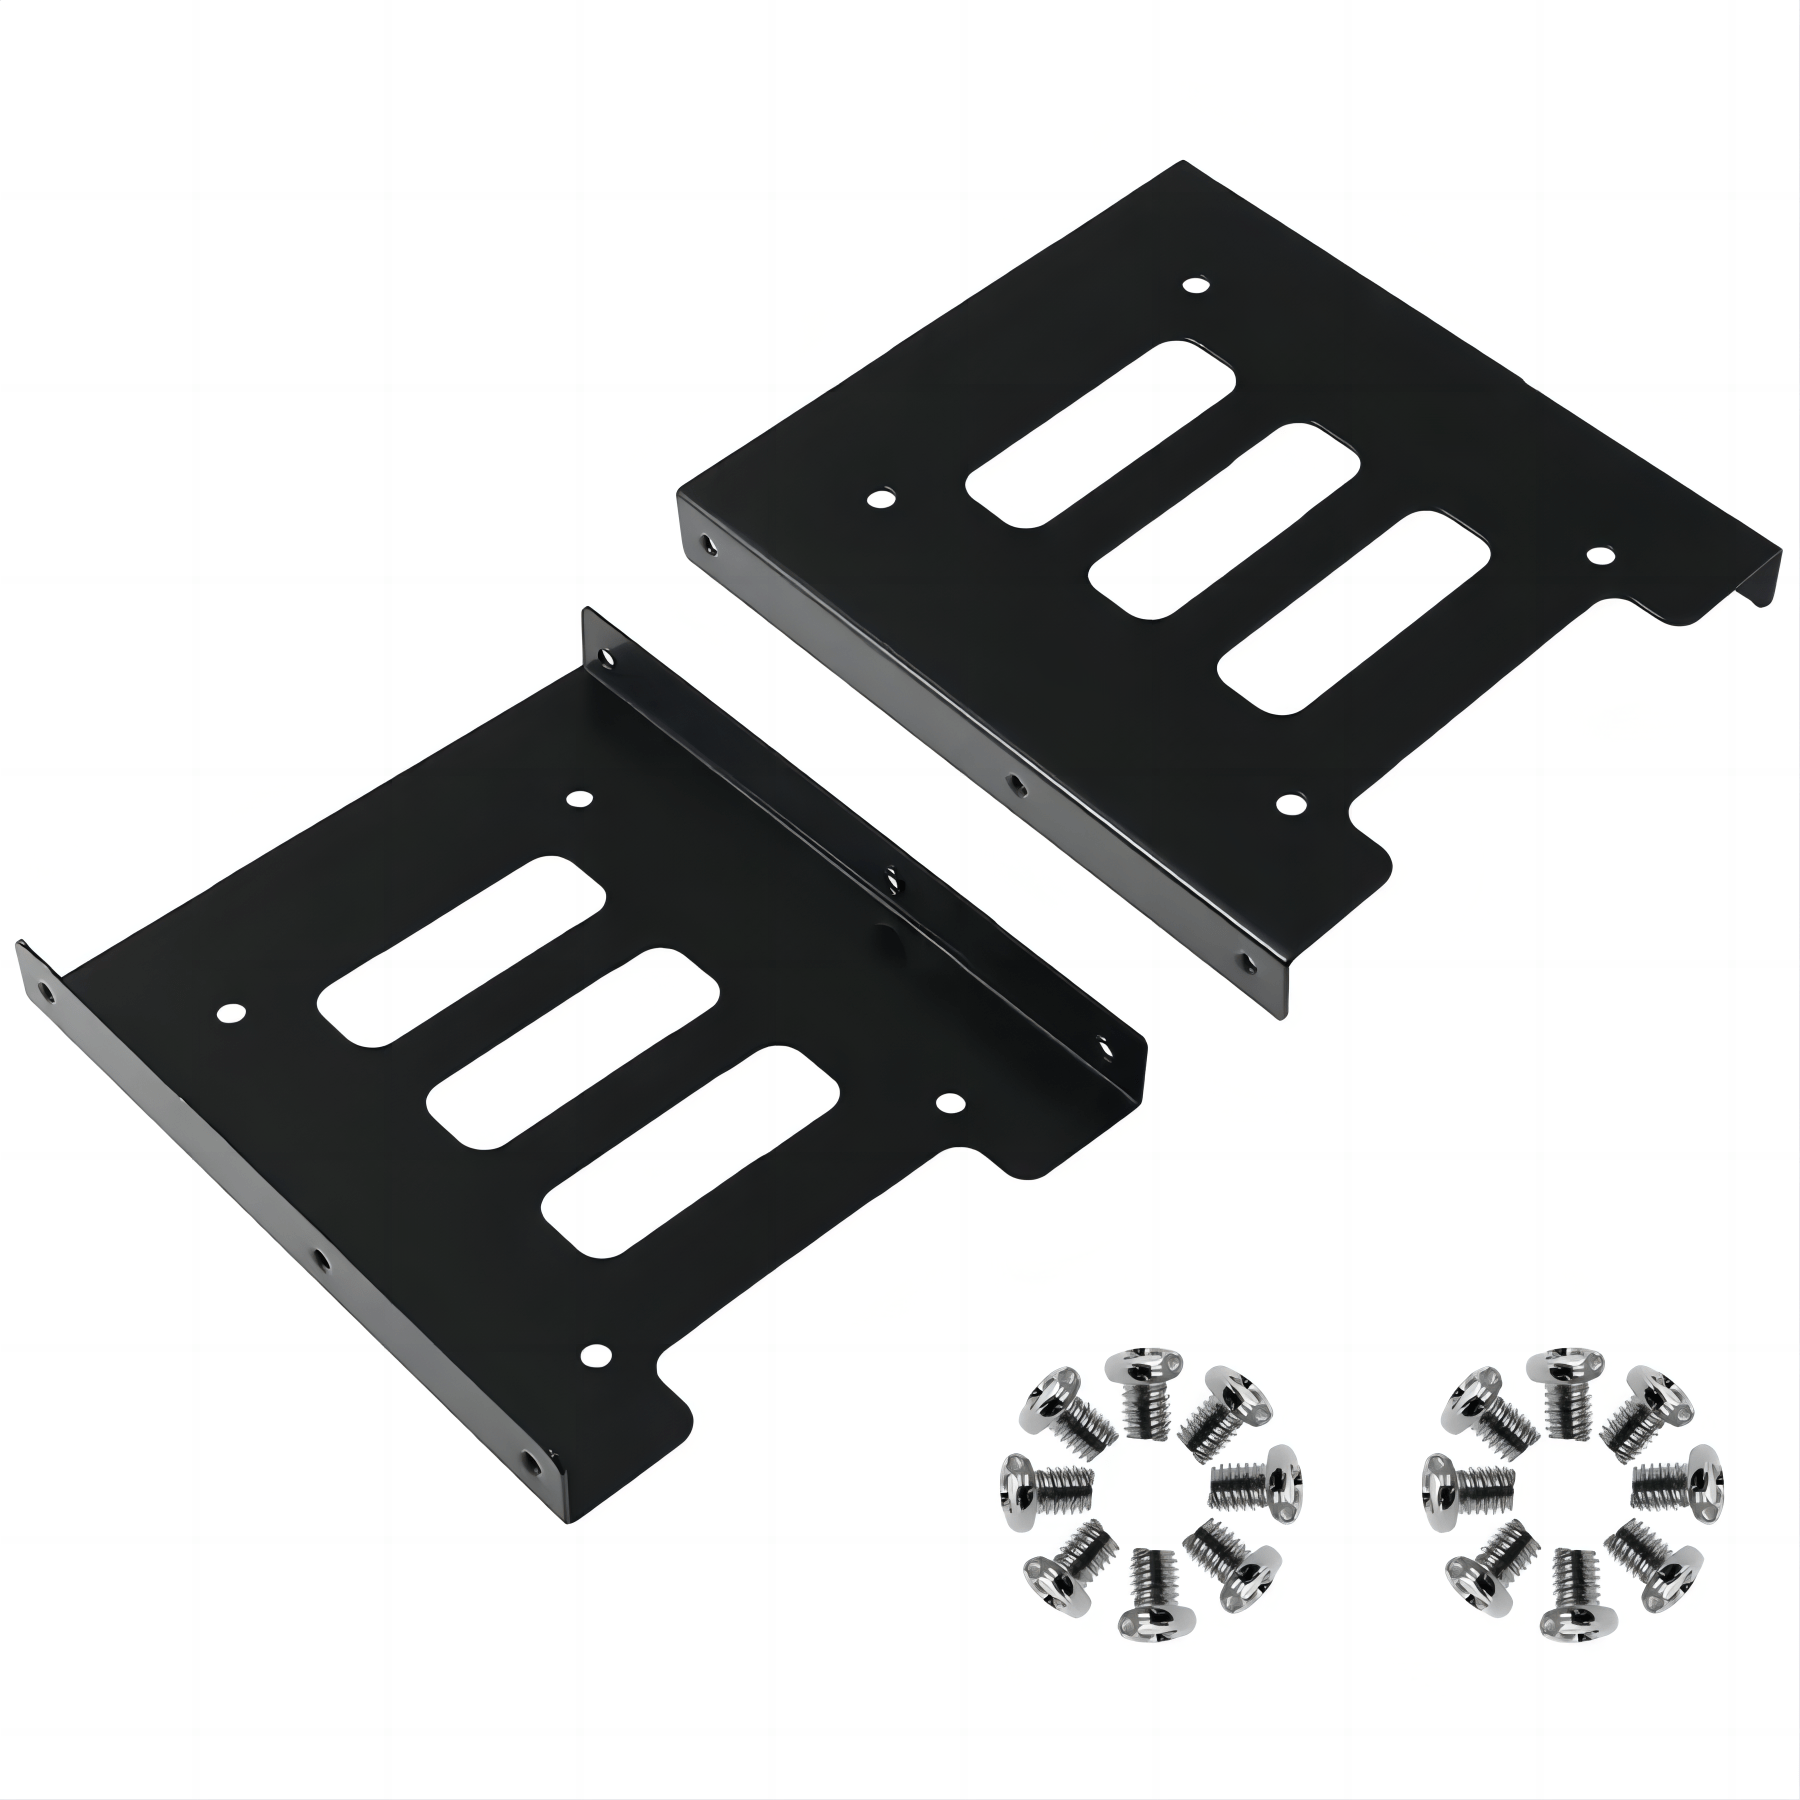 2packs 2.5 To 3.5 SSD HDD Hard Disk Drive Bays Holder Metal Mounting  Bracket Adapter For PC SSD Holder